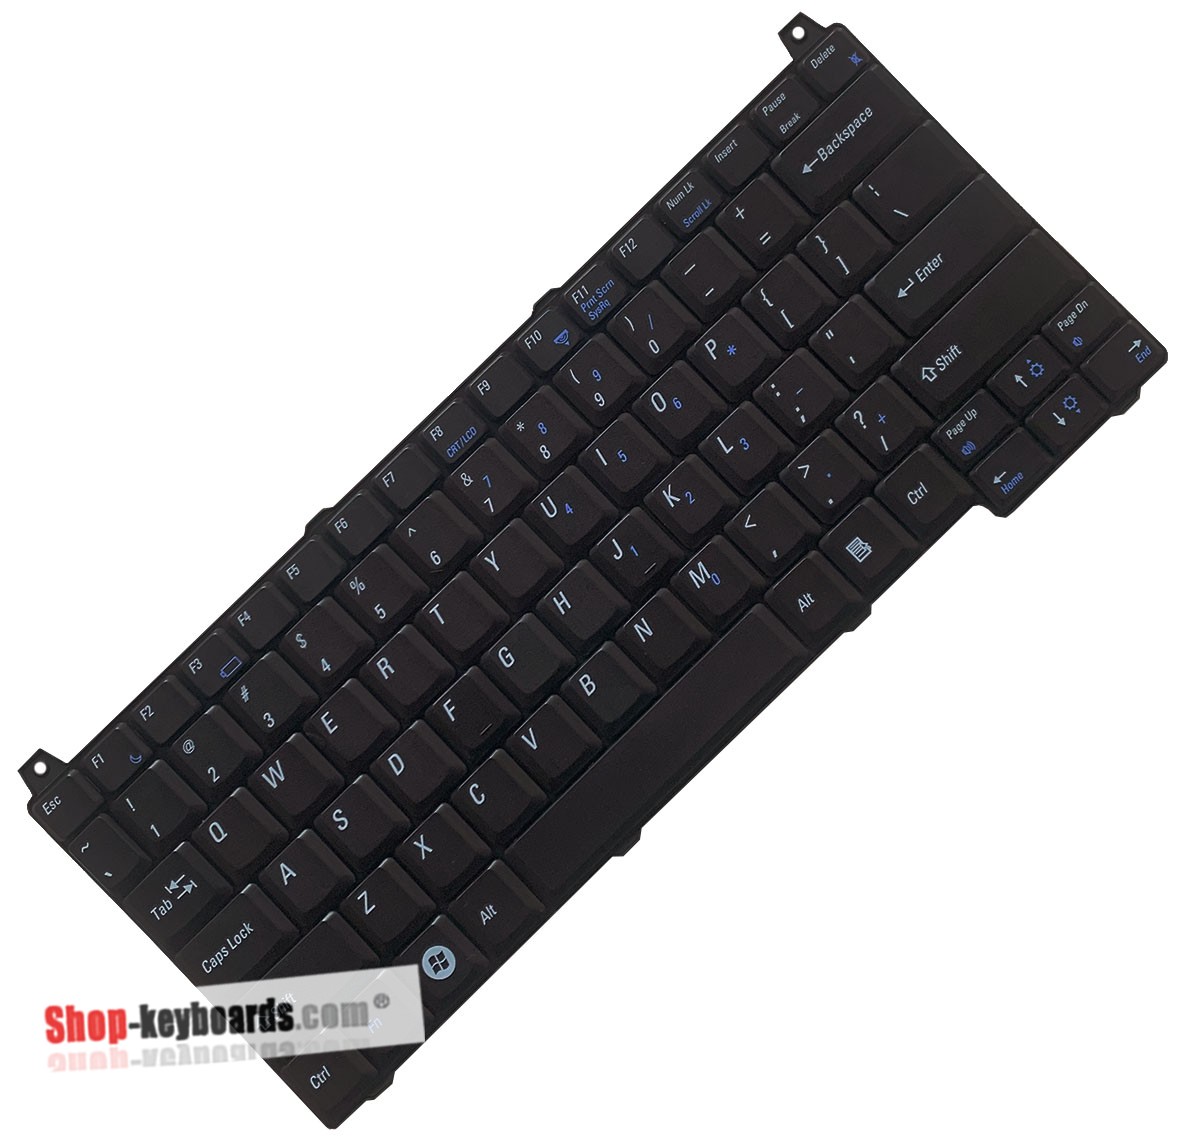 Dell Vostro 1510 Keyboard replacement